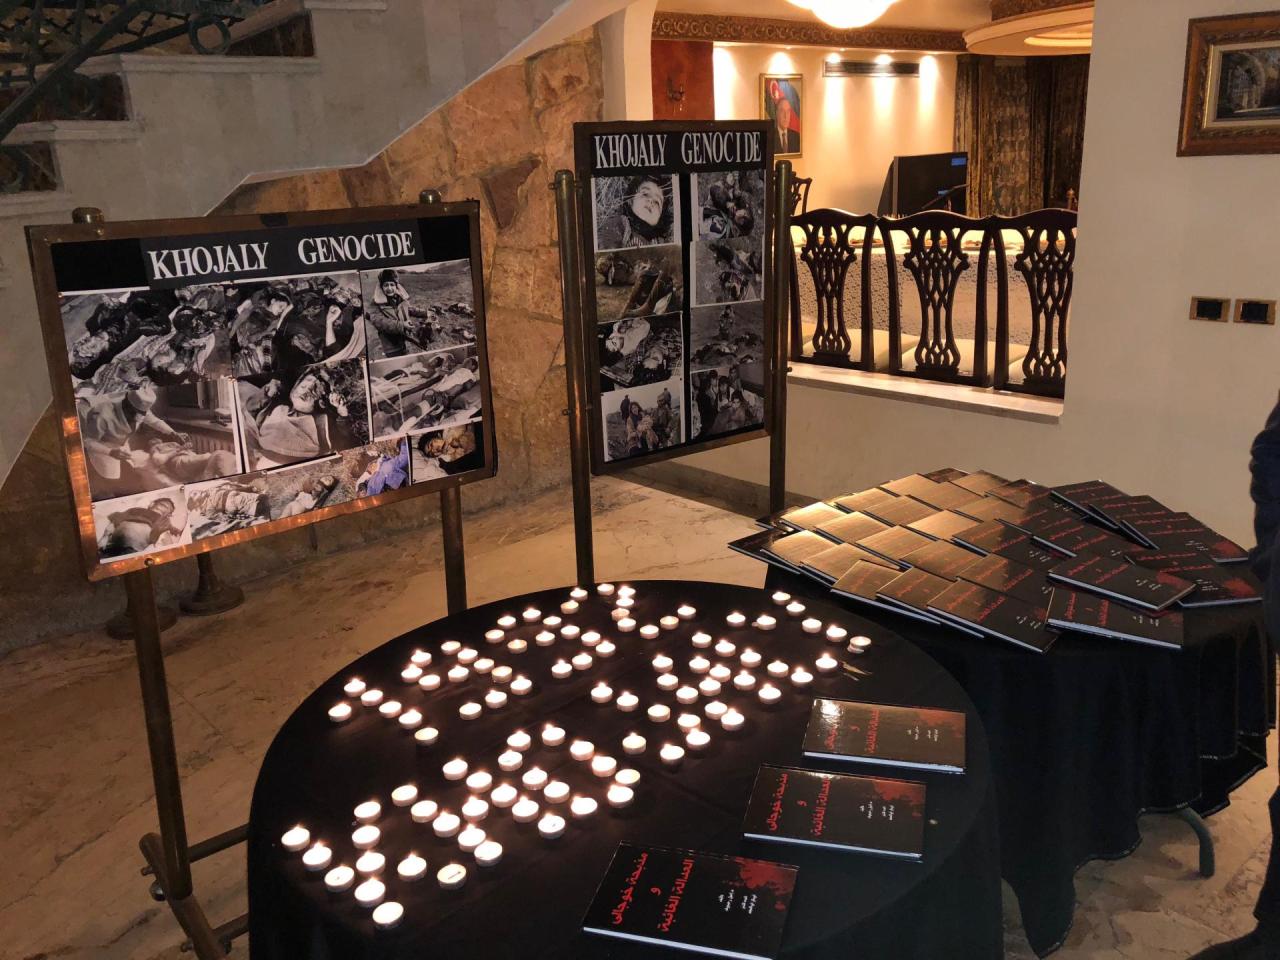 Cairo hosts event on Khojaly genocide anniversary [PHOTO]